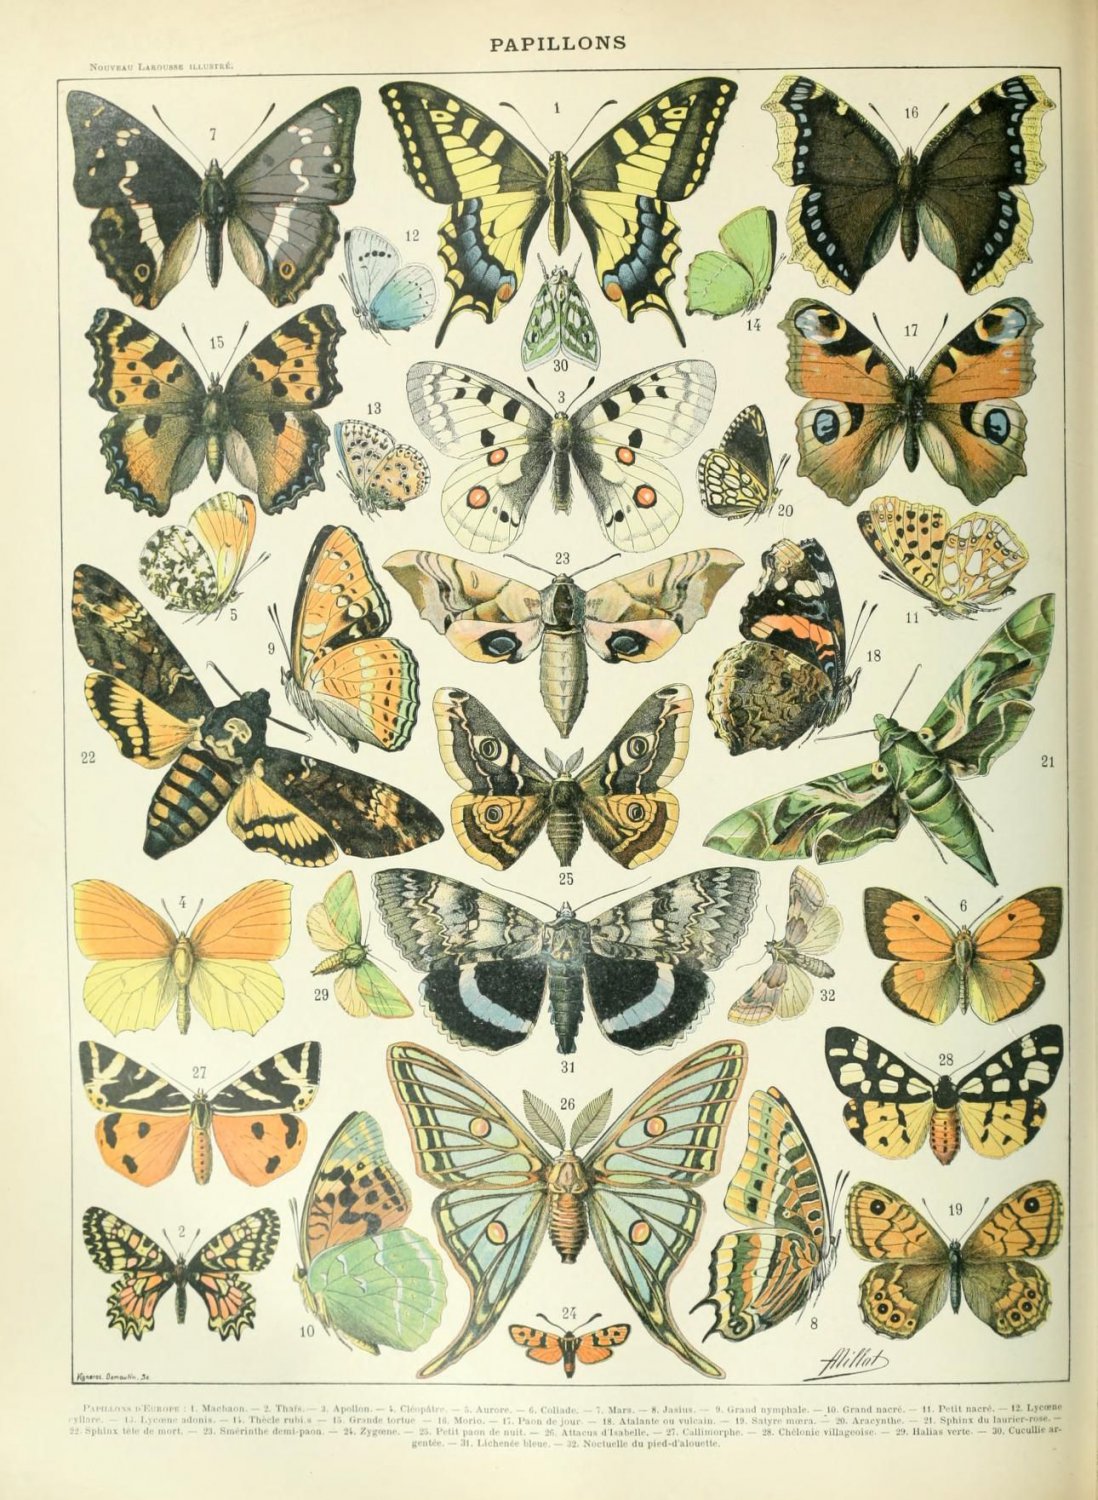 Different Types of Insects Butterflies Papillon Chart  18"x28" (45cm/70cm) Poster